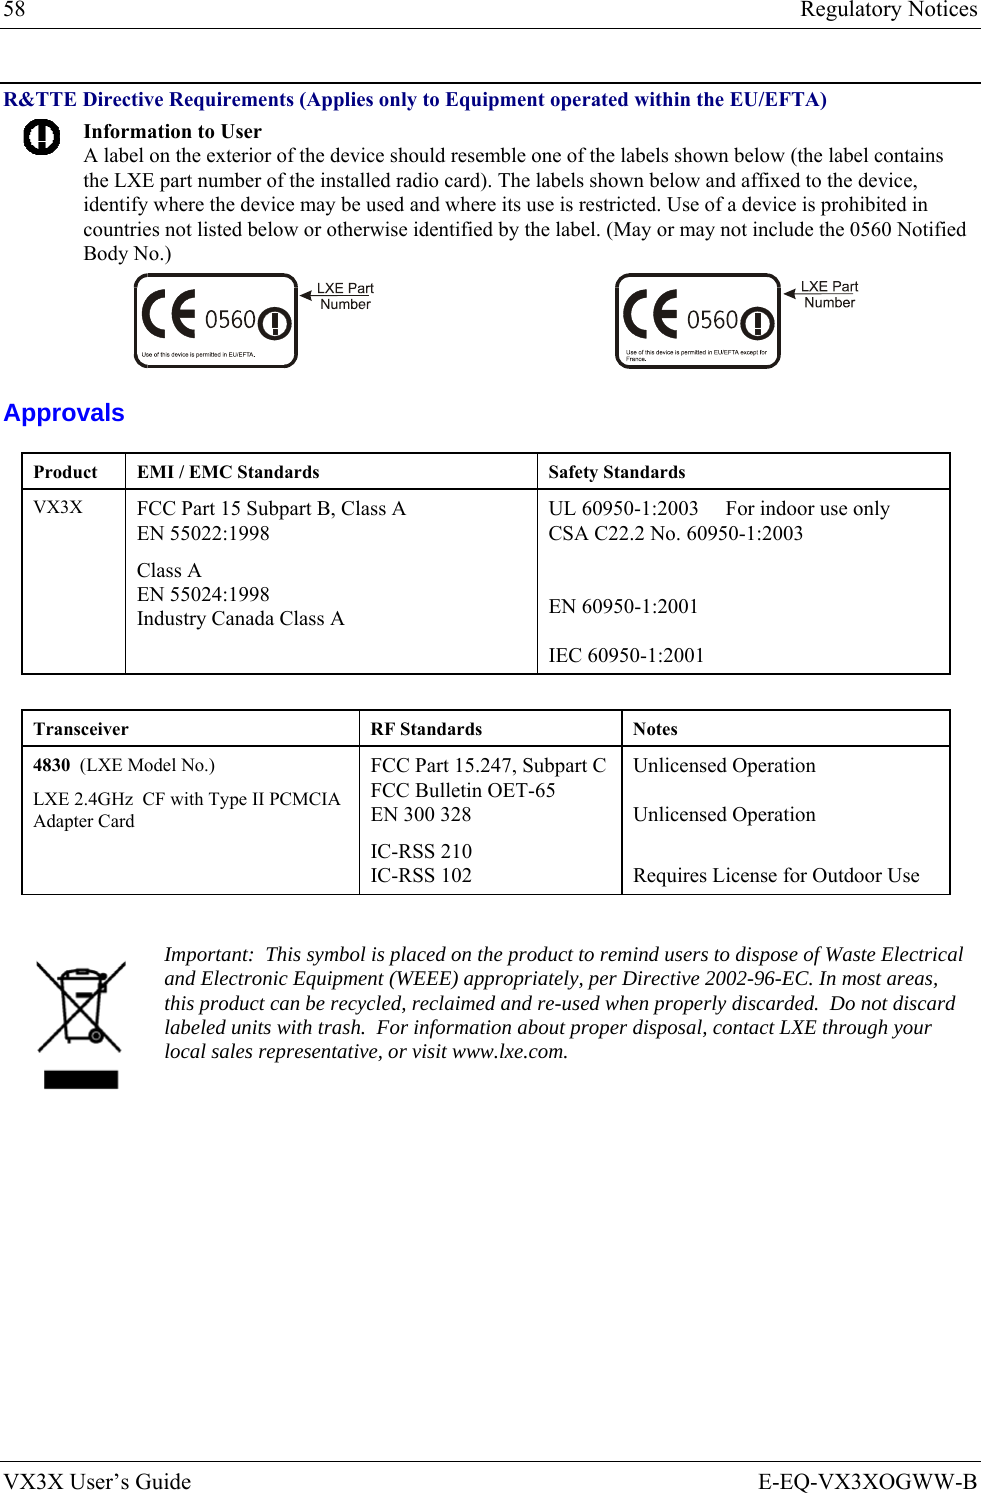 58  Regulatory Notices VX3X User’s Guide  E-EQ-VX3XOGWW-B R&amp;TTE Directive Requirements (Applies only to Equipment operated within the EU/EFTA)  Information to User A label on the exterior of the device should resemble one of the labels shown below (the label contains the LXE part number of the installed radio card). The labels shown below and affixed to the device, identify where the device may be used and where its use is restricted. Use of a device is prohibited in countries not listed below or otherwise identified by the label. (May or may not include the 0560 Notified Body No.)   Approvals Product  EMI / EMC Standards  Safety Standards VX3X   FCC Part 15 Subpart B, Class A EN 55022:1998 Class A EN 55024:1998 Industry Canada Class A UL 60950-1:2003     For indoor use only CSA C22.2 No. 60950-1:2003   EN 60950-1:2001  IEC 60950-1:2001  Transceiver RF Standards Notes 4830  (LXE Model No.) LXE 2.4GHz  CF with Type II PCMCIA Adapter Card FCC Part 15.247, Subpart CFCC Bulletin OET-65 EN 300 328 IC-RSS 210 IC-RSS 102 Unlicensed Operation  Unlicensed Operation  Requires License for Outdoor Use   Important:  This symbol is placed on the product to remind users to dispose of Waste Electrical and Electronic Equipment (WEEE) appropriately, per Directive 2002-96-EC. In most areas, this product can be recycled, reclaimed and re-used when properly discarded.  Do not discard labeled units with trash.  For information about proper disposal, contact LXE through your local sales representative, or visit www.lxe.com.   